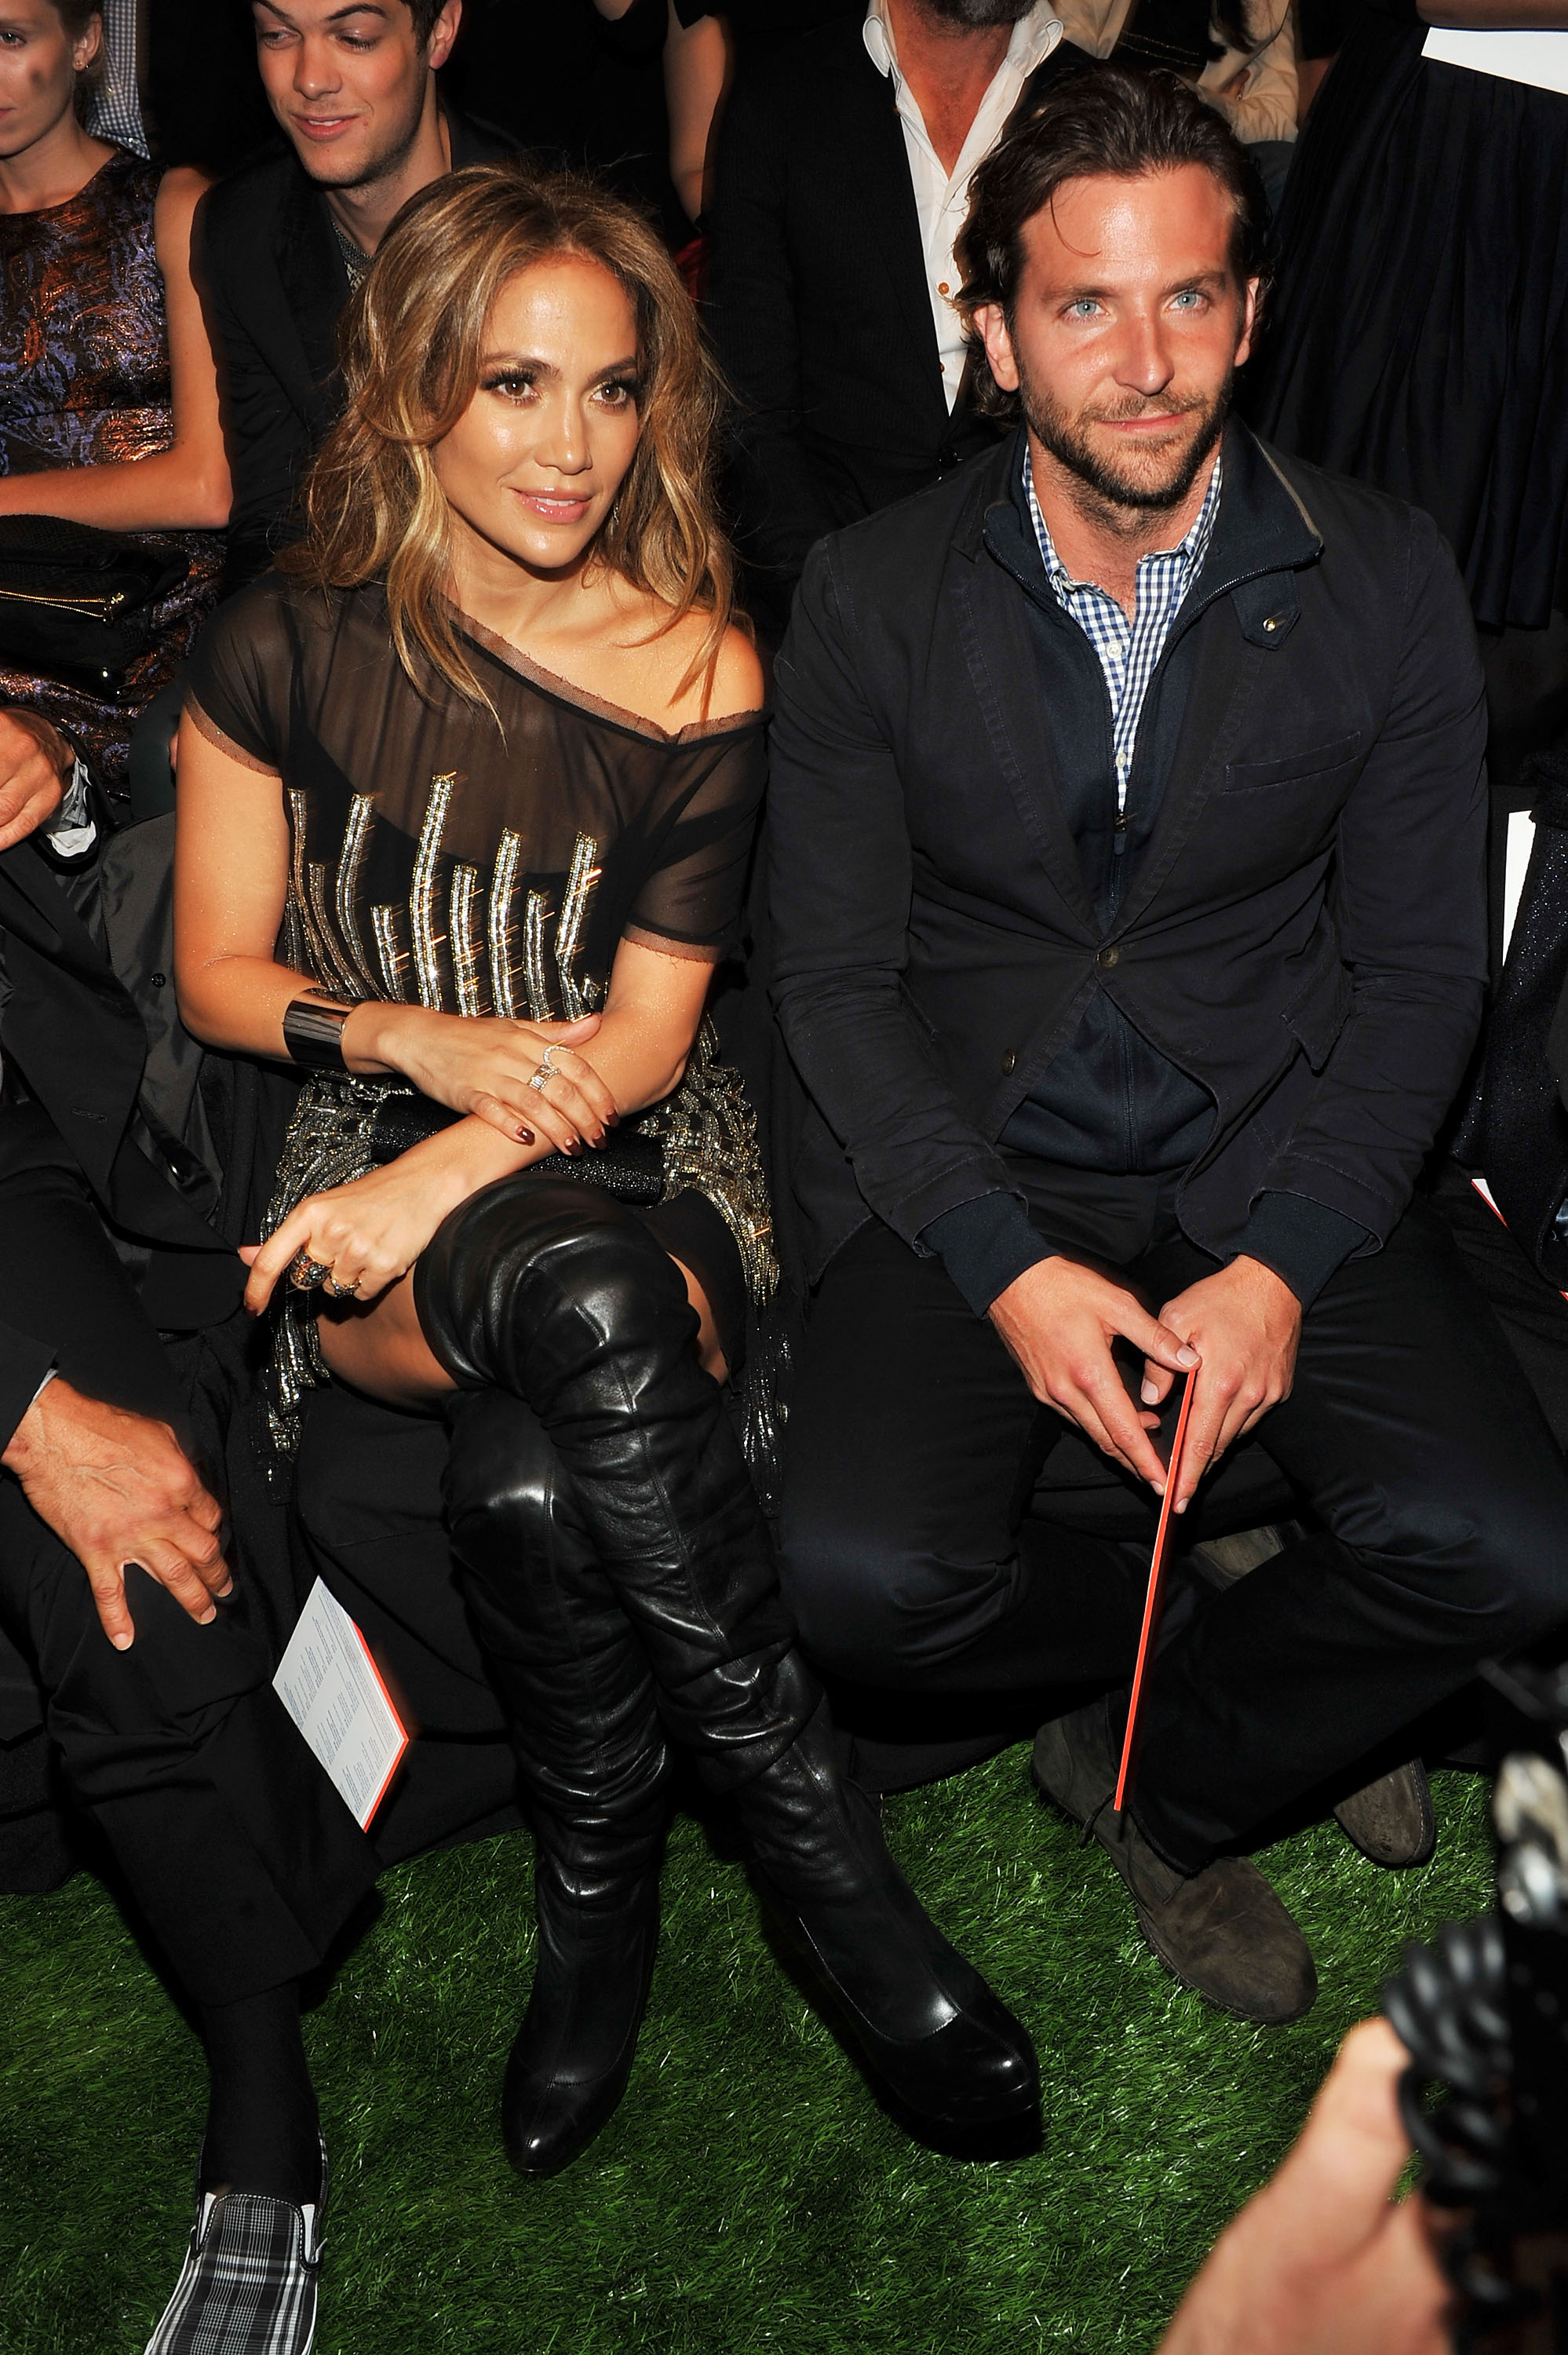 Jennifer Lopez and Bradley Cooper attend the Tommy Hilfiger Spring 2011 Men’s and Women’s show during Mercedes-Benz fashion week at Lincoln Center on September 12, 2010 in New York City